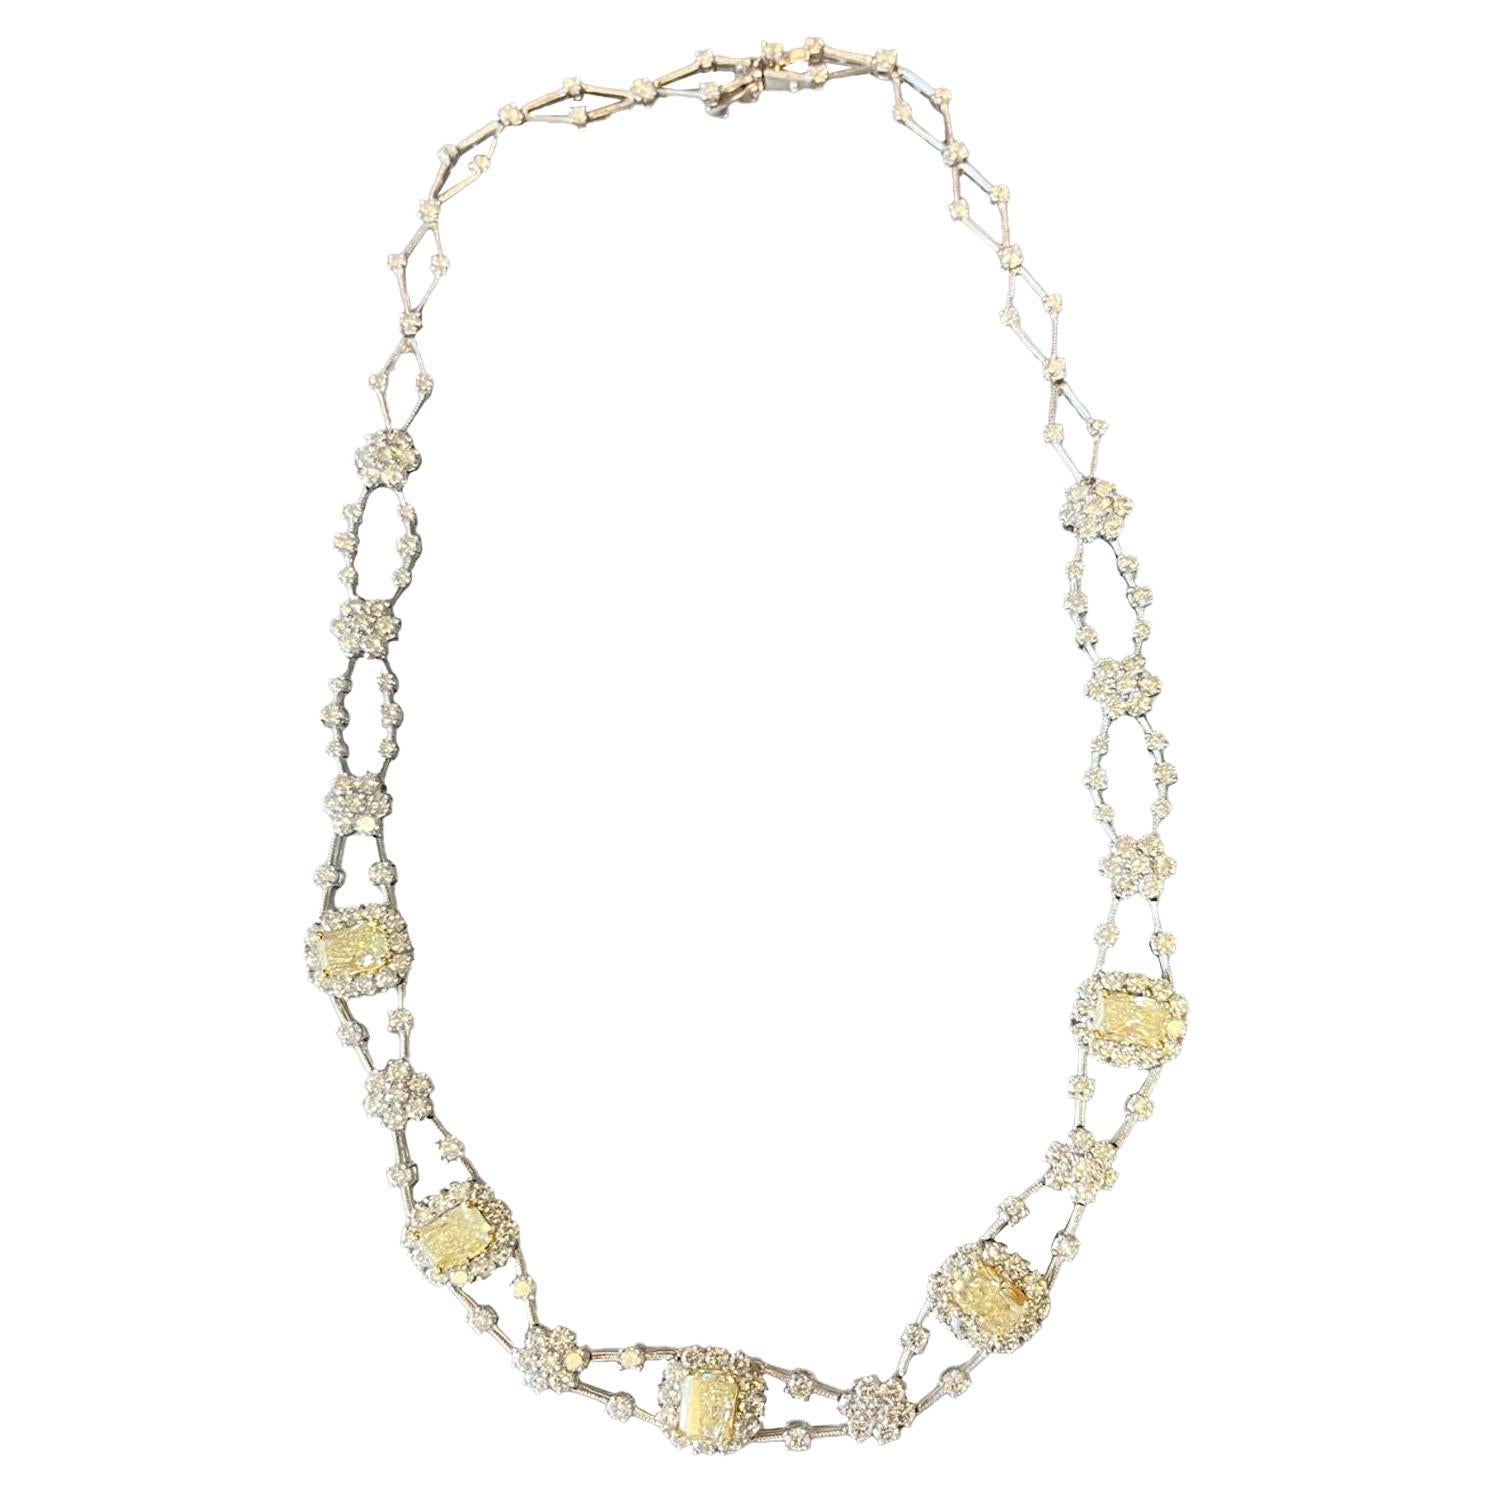 11.8ctw Natural Radiant Cut Yellow Fancy Color 5.80ct White Diamonds Necklace For Sale